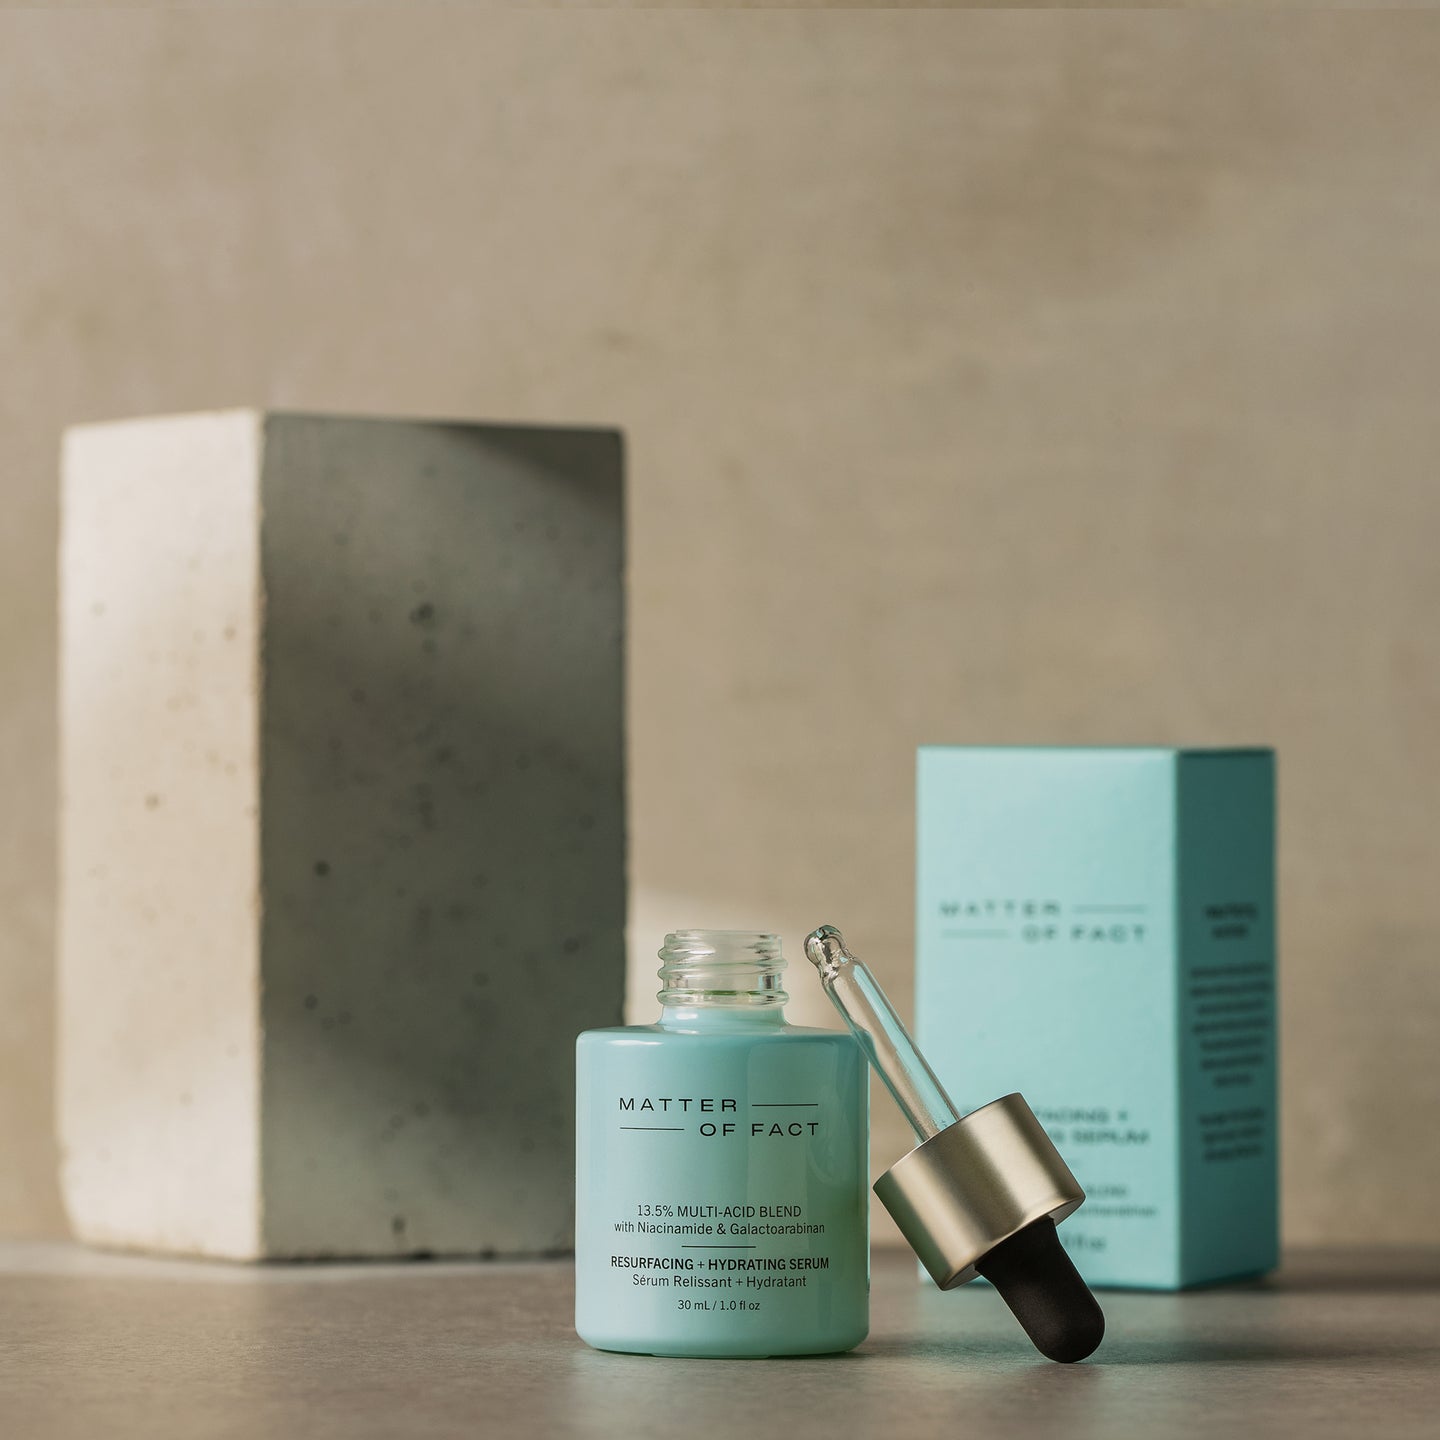 MATTER OF FACT SKINCARE RESURFACING AND HYDRATING SERUM product vessel on a beige background with the product packaging and applicator visible